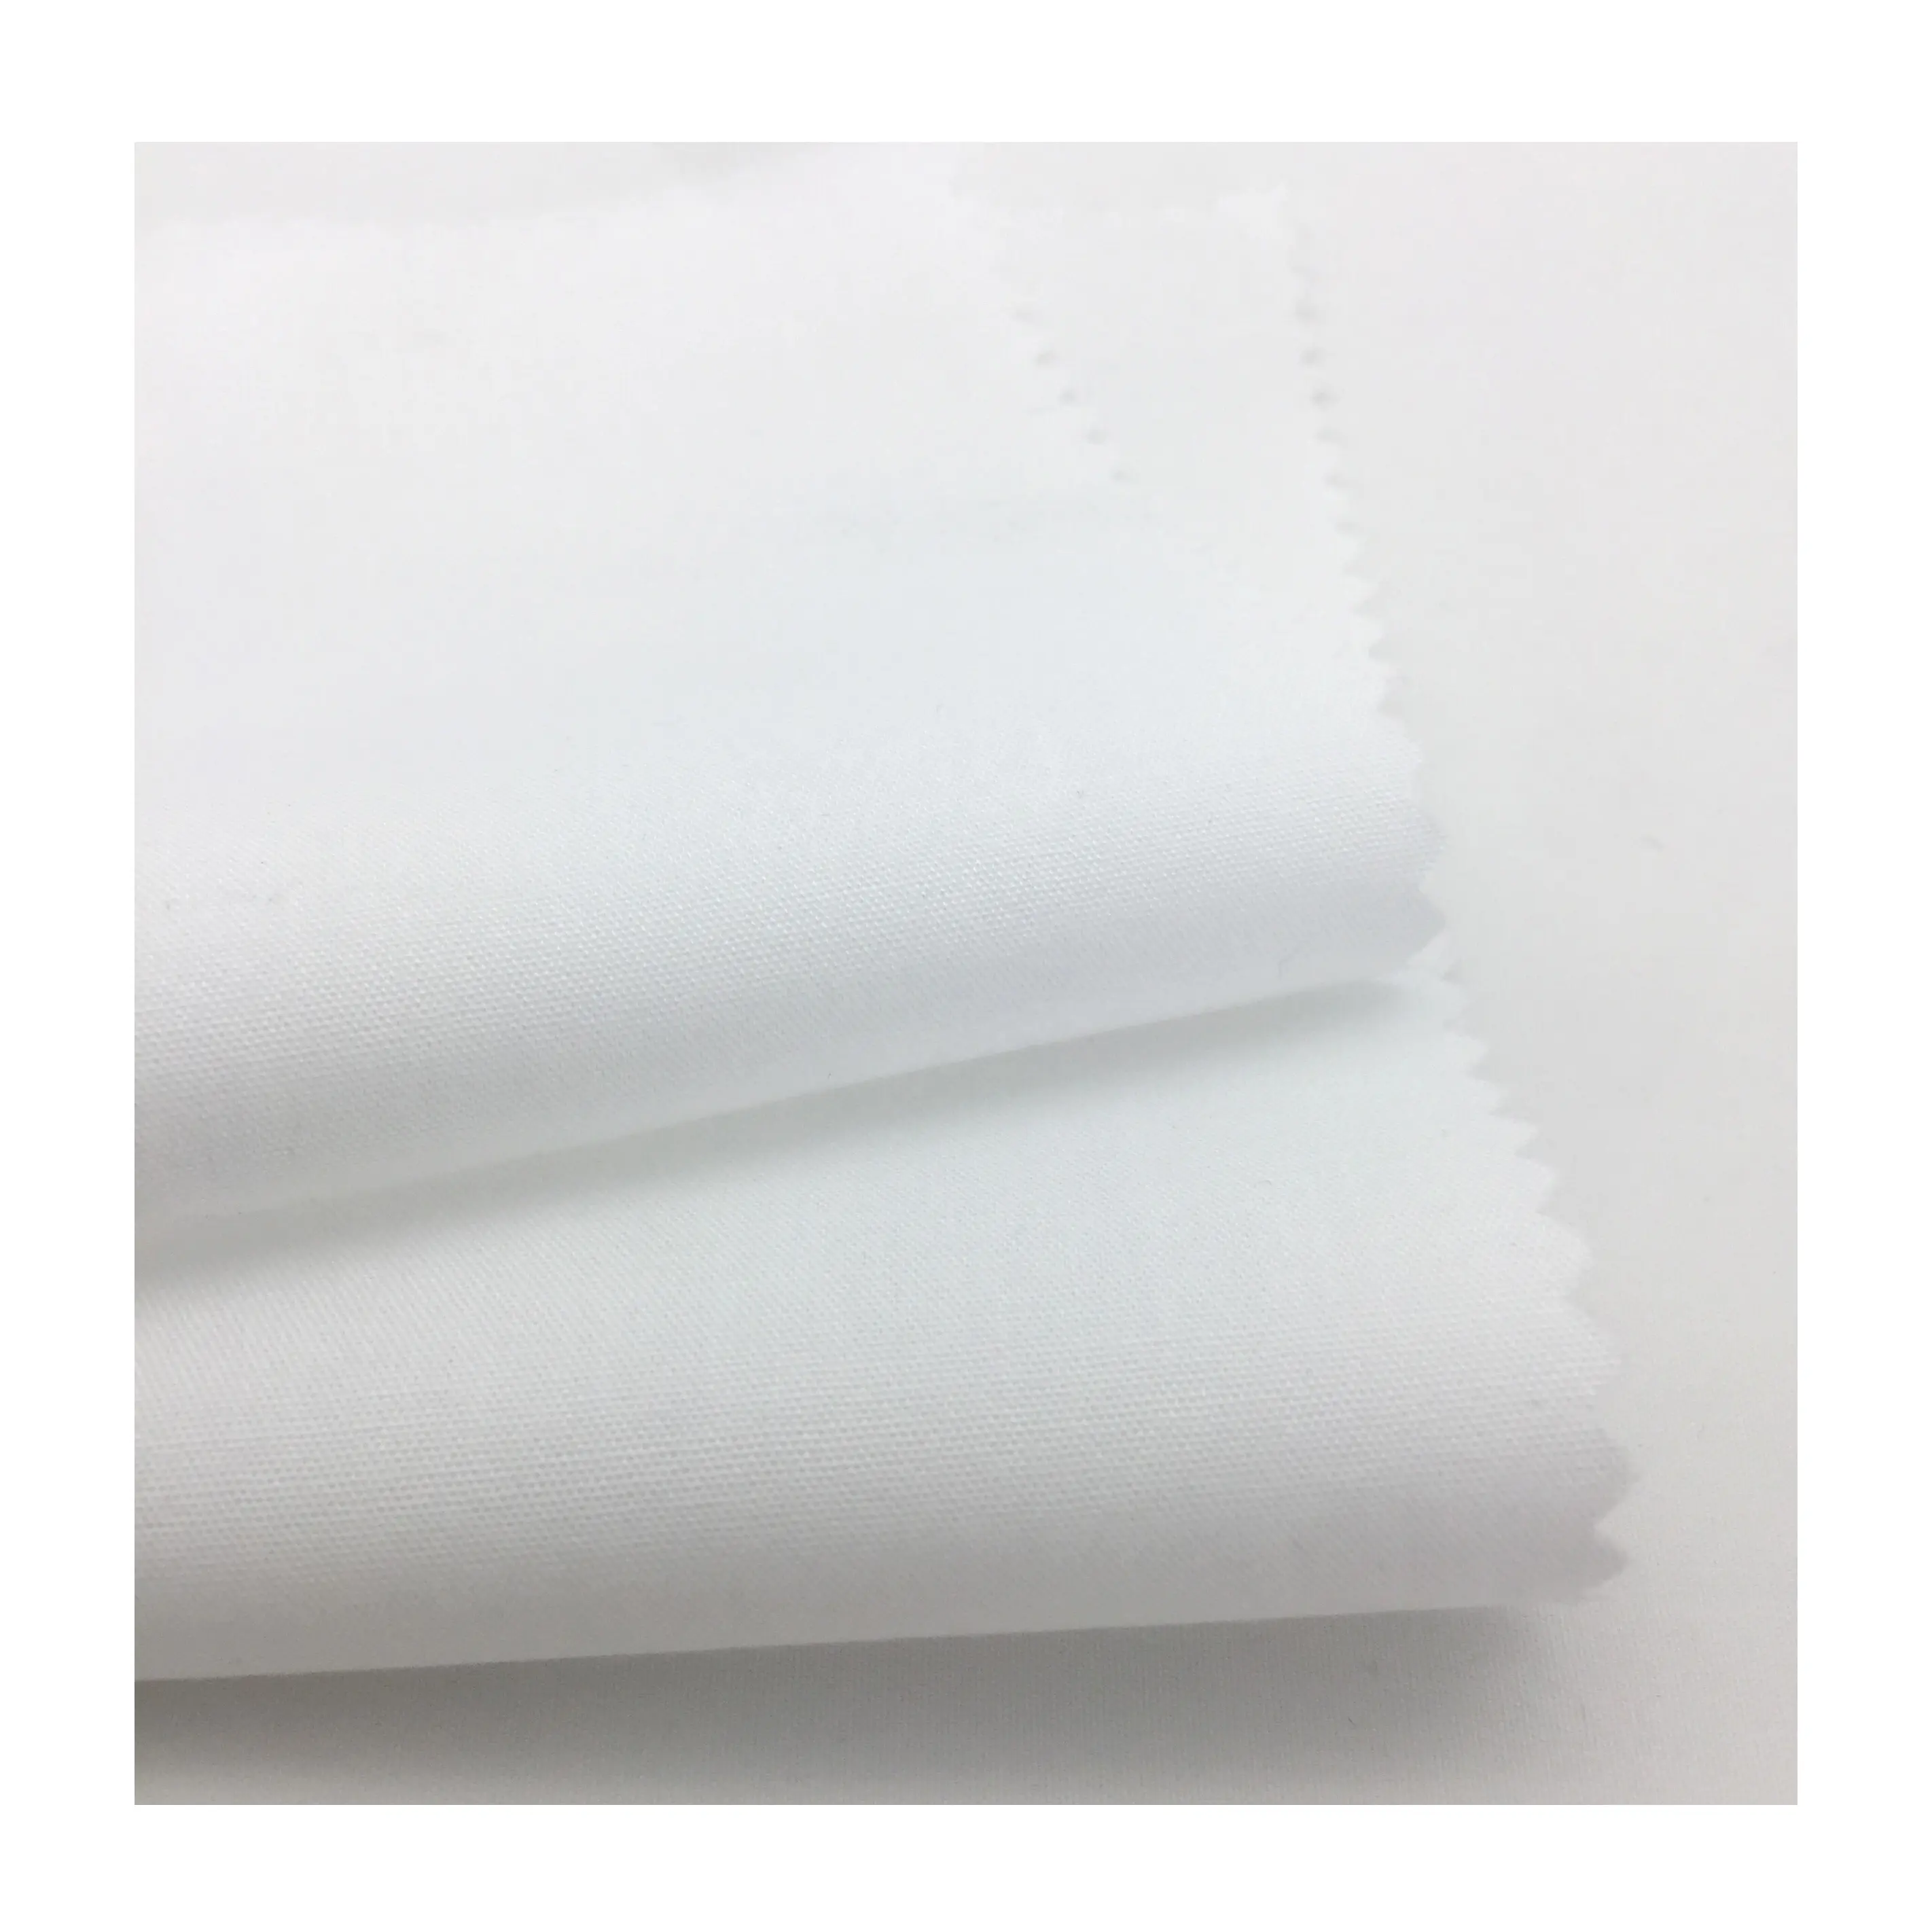 100% cotton organic soft stock woven bleached white fabric